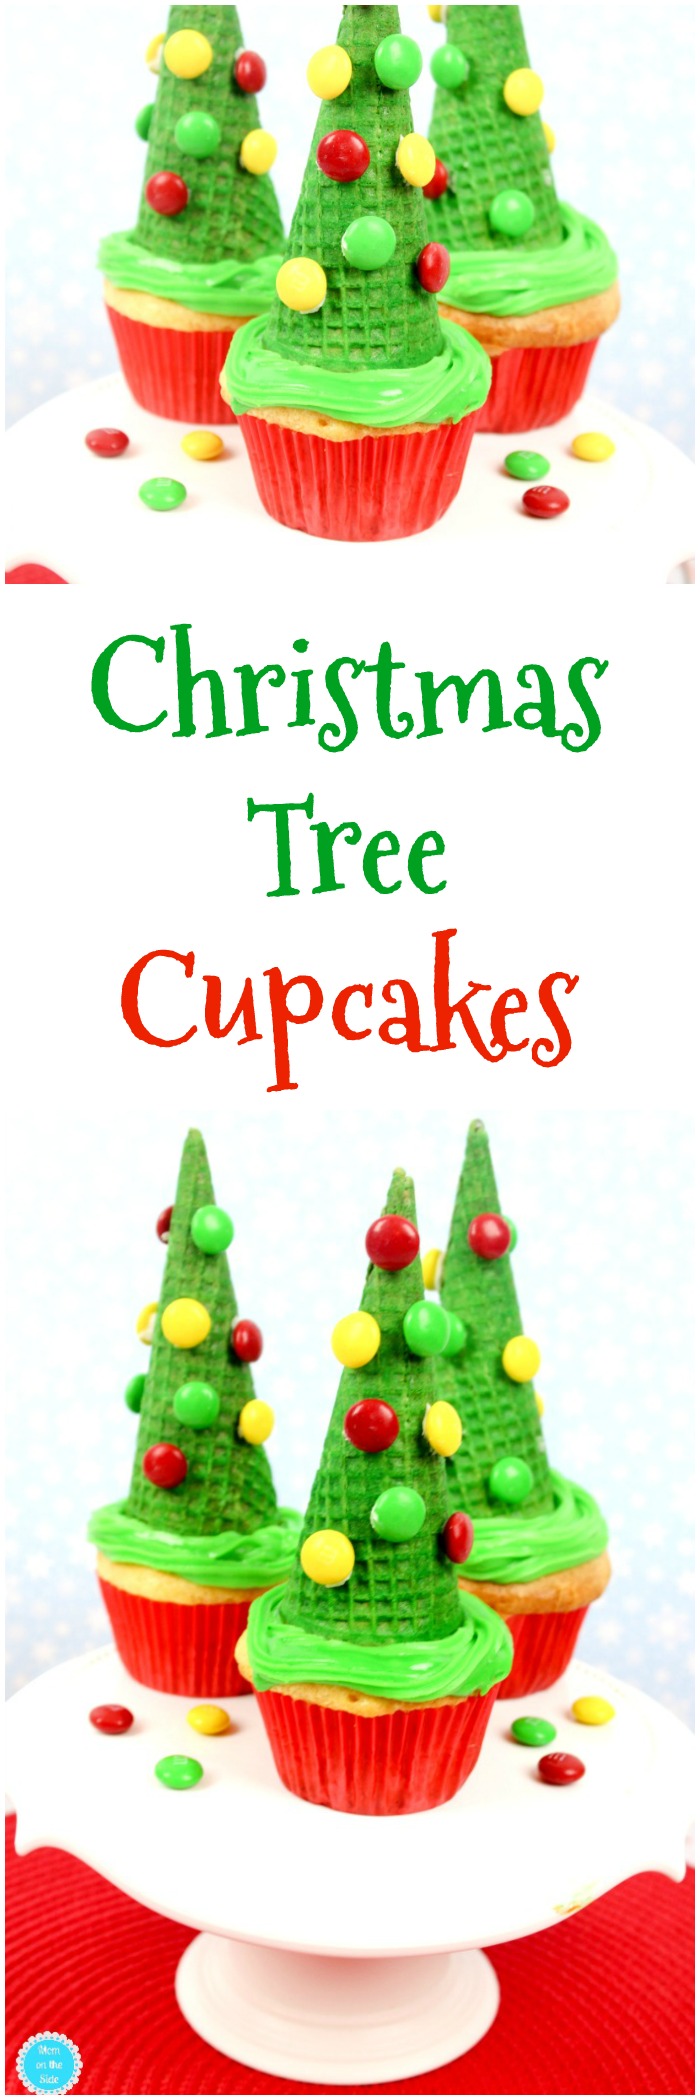 If you want a fun Christmas dessert for kids give these Christmas Tree Cupcakes a try! 